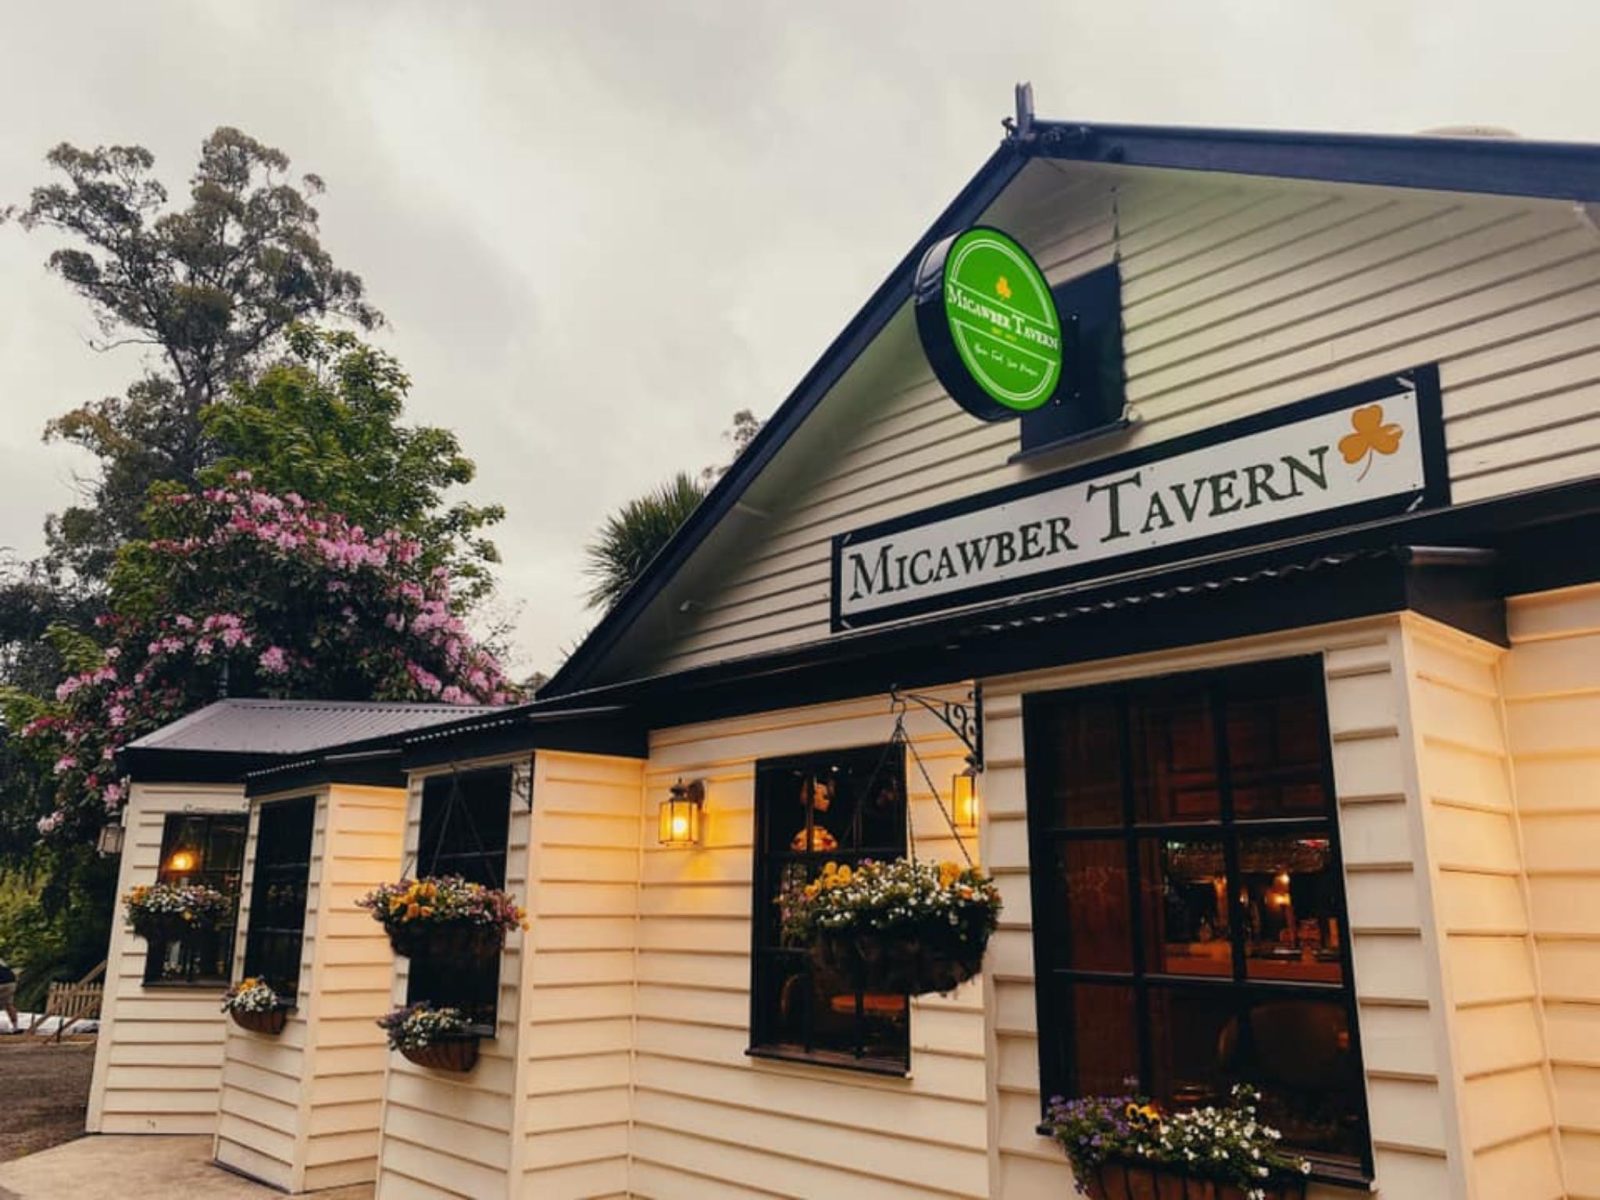 Micawber Tavern has live music every weekend through out summer